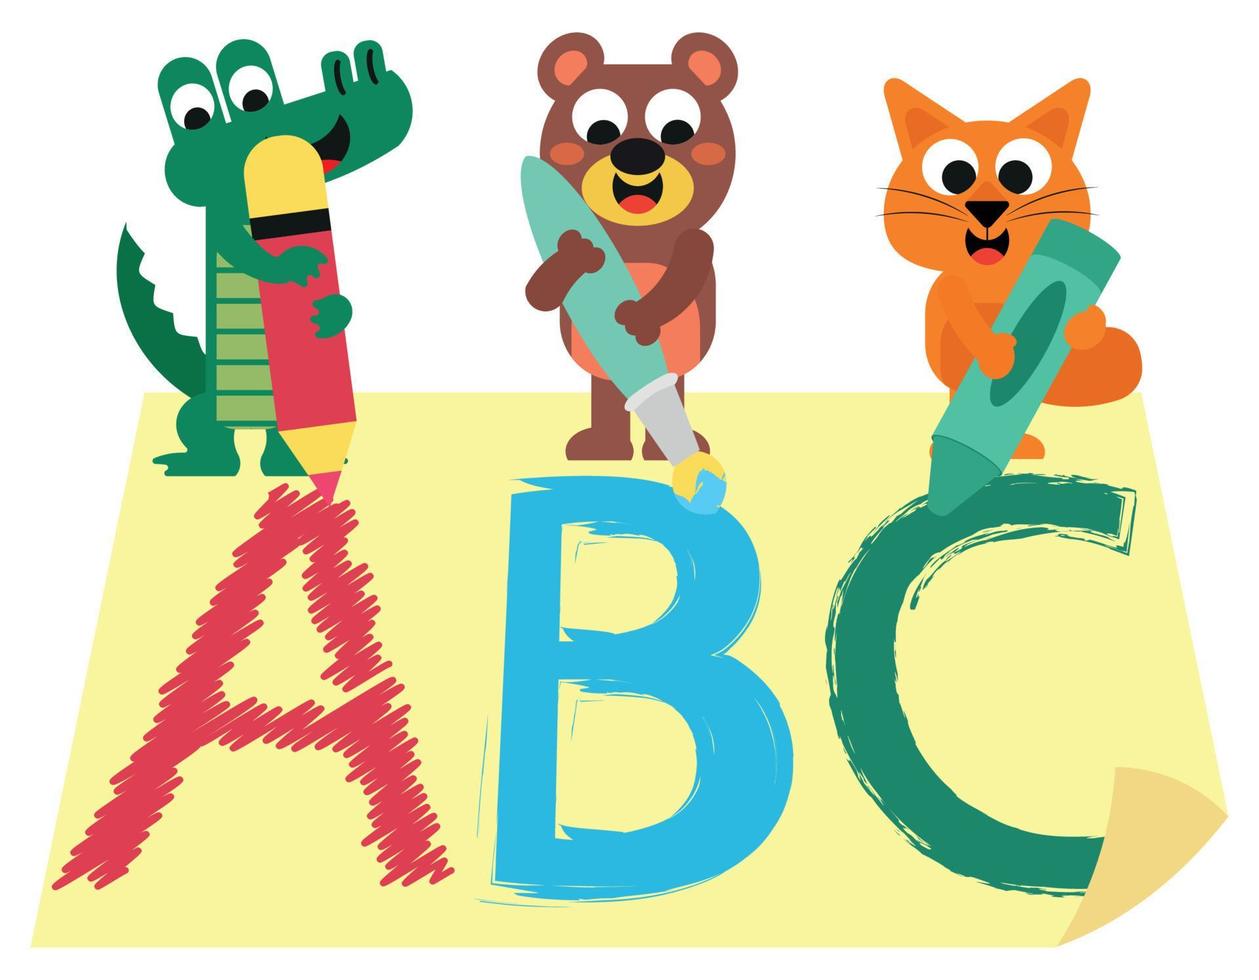 Cute animals  draw abc letters and paint them vector